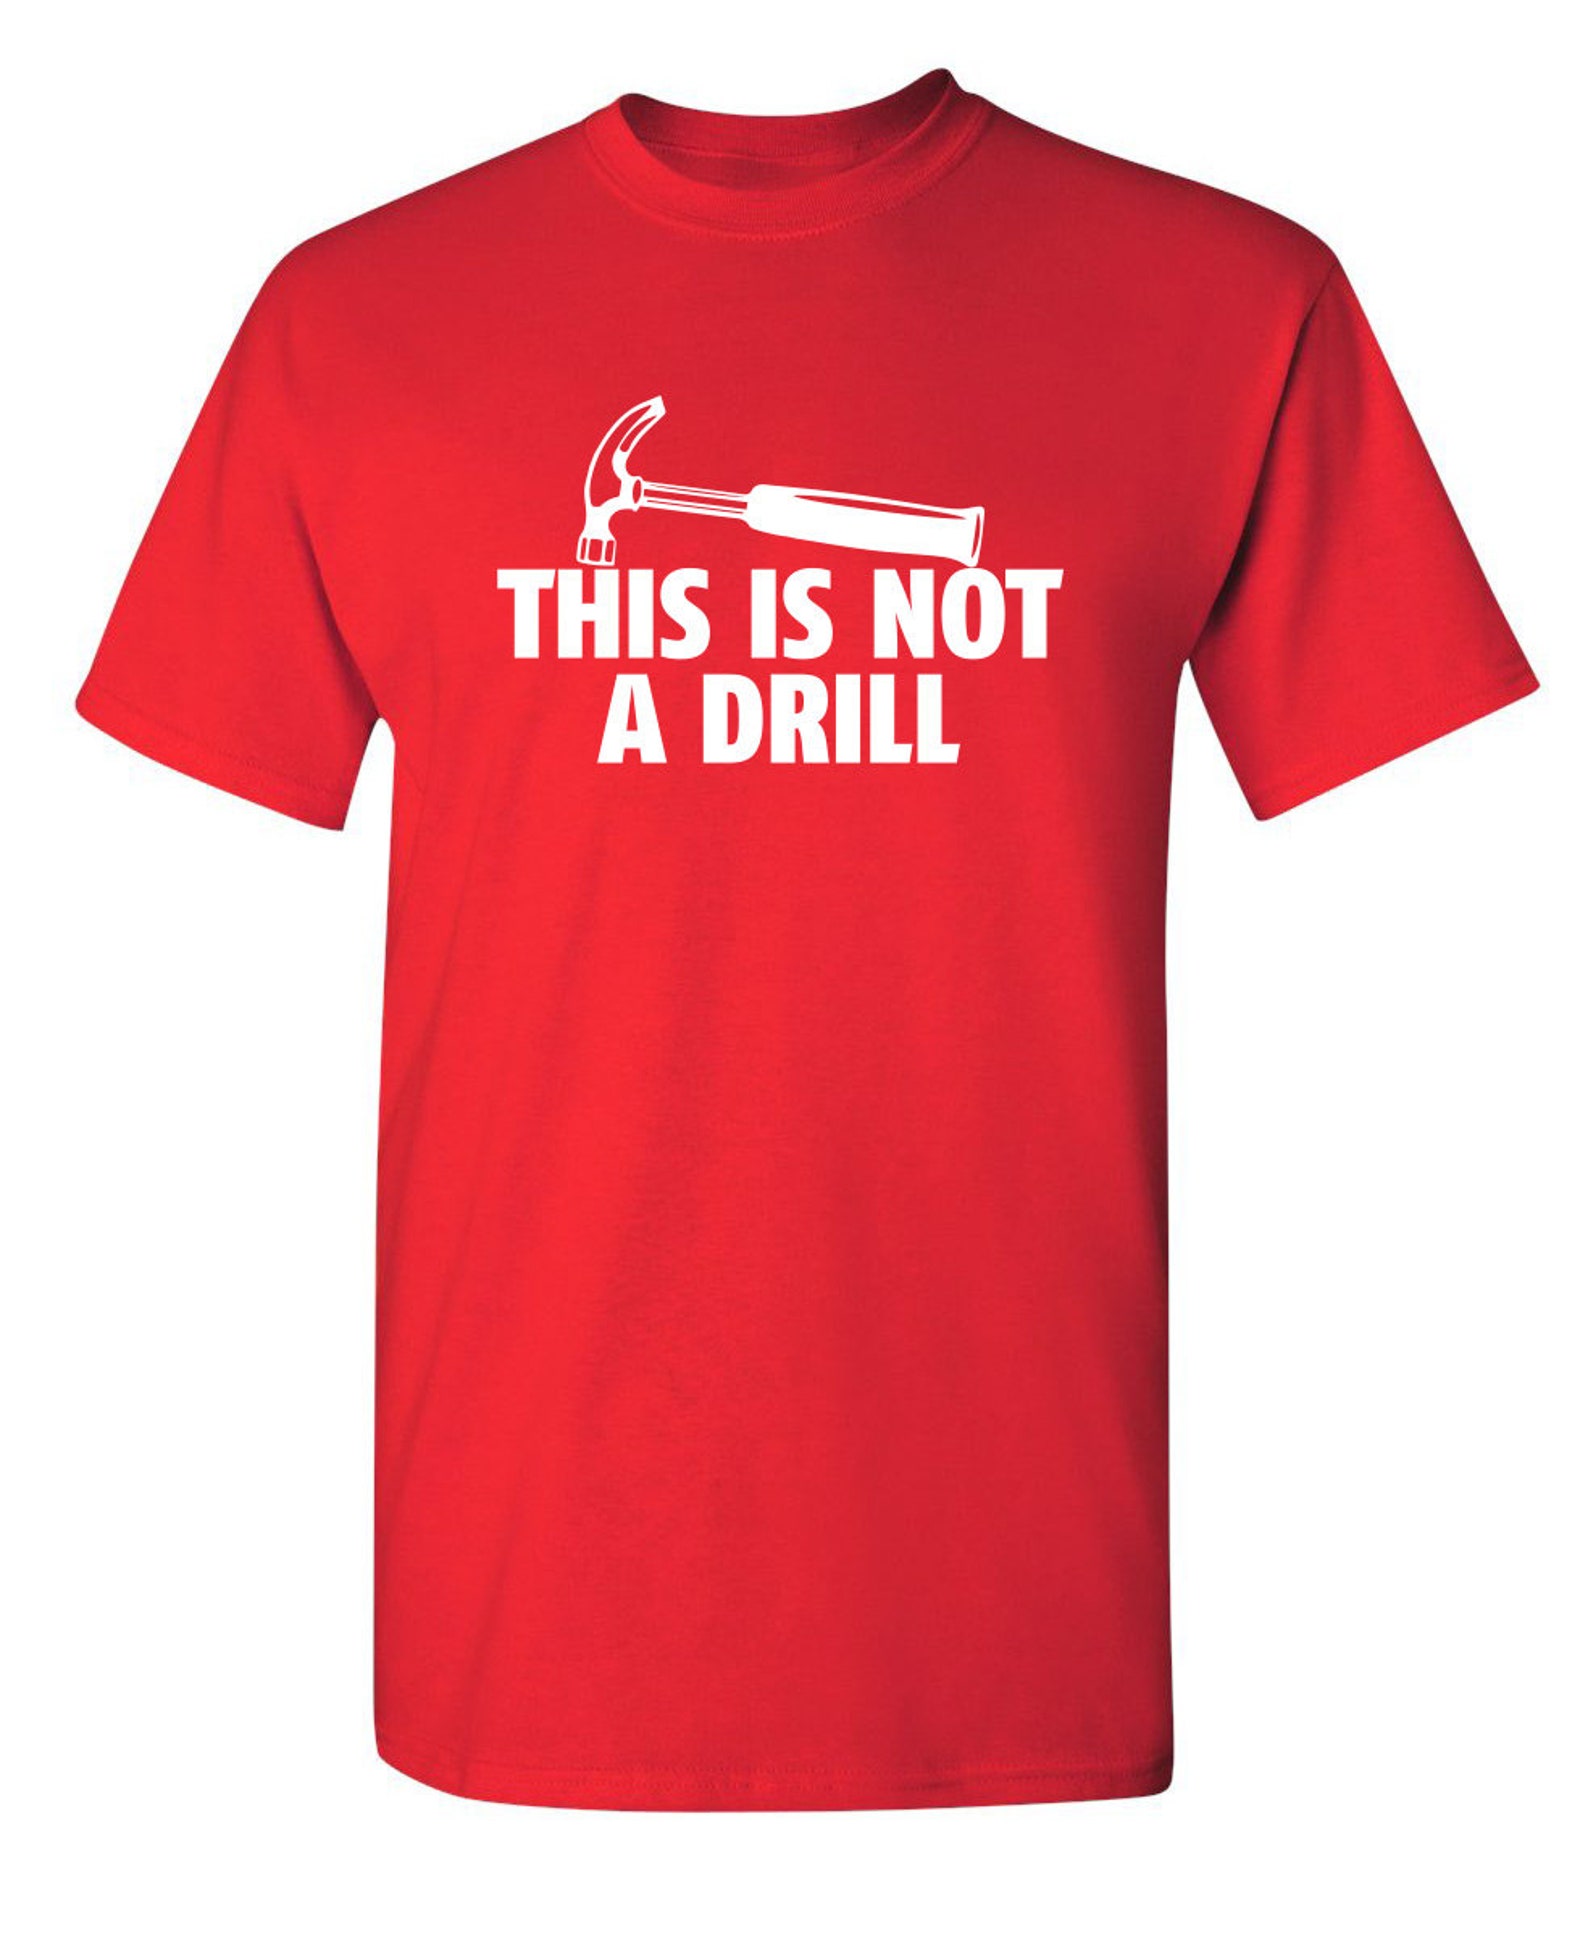 This is Not A Drill Sarcastic Humor Graphic Novelty Funny T | Etsy